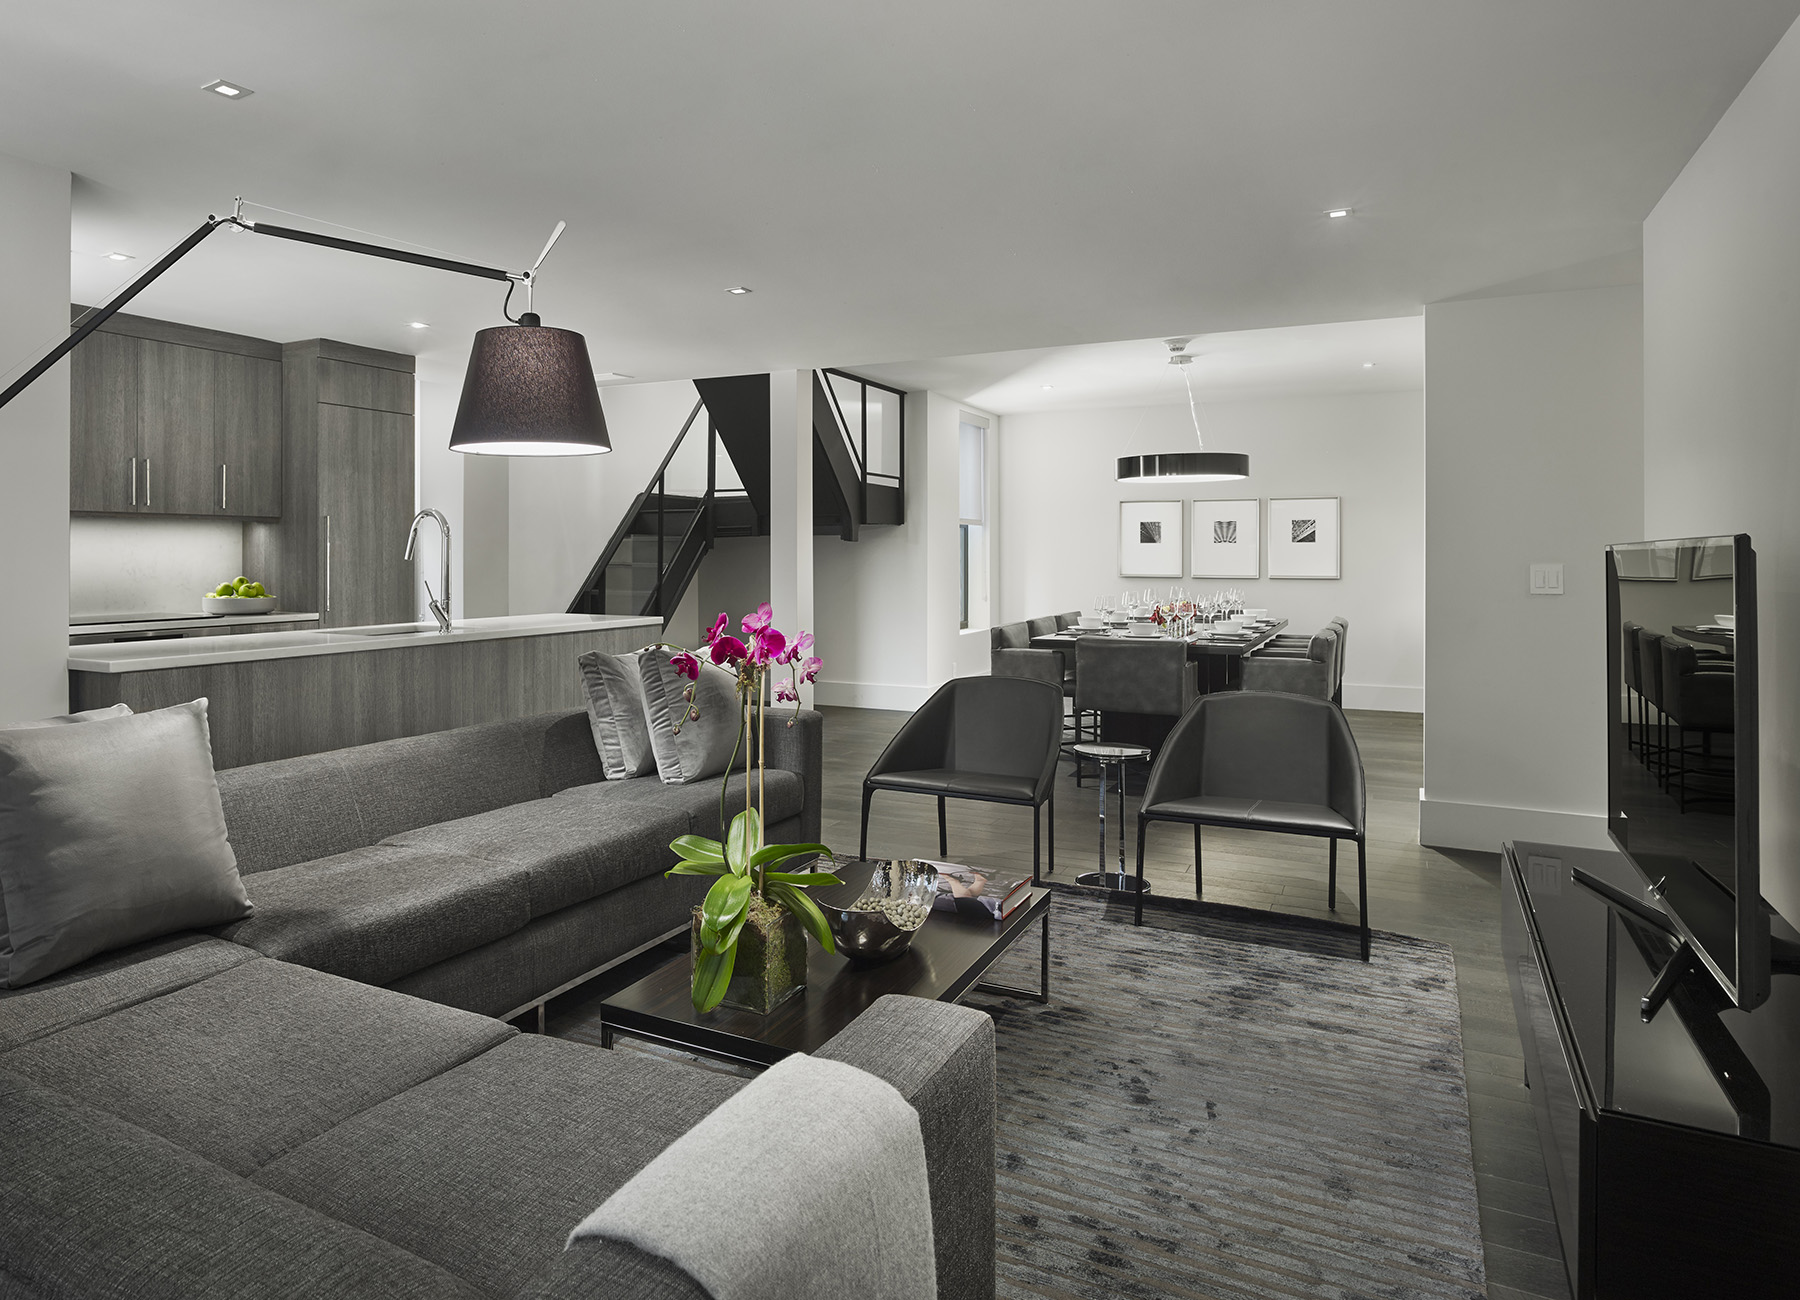 AKA Times Square bilevel penthouse lounge with modern gray furniture and view into the kitchen